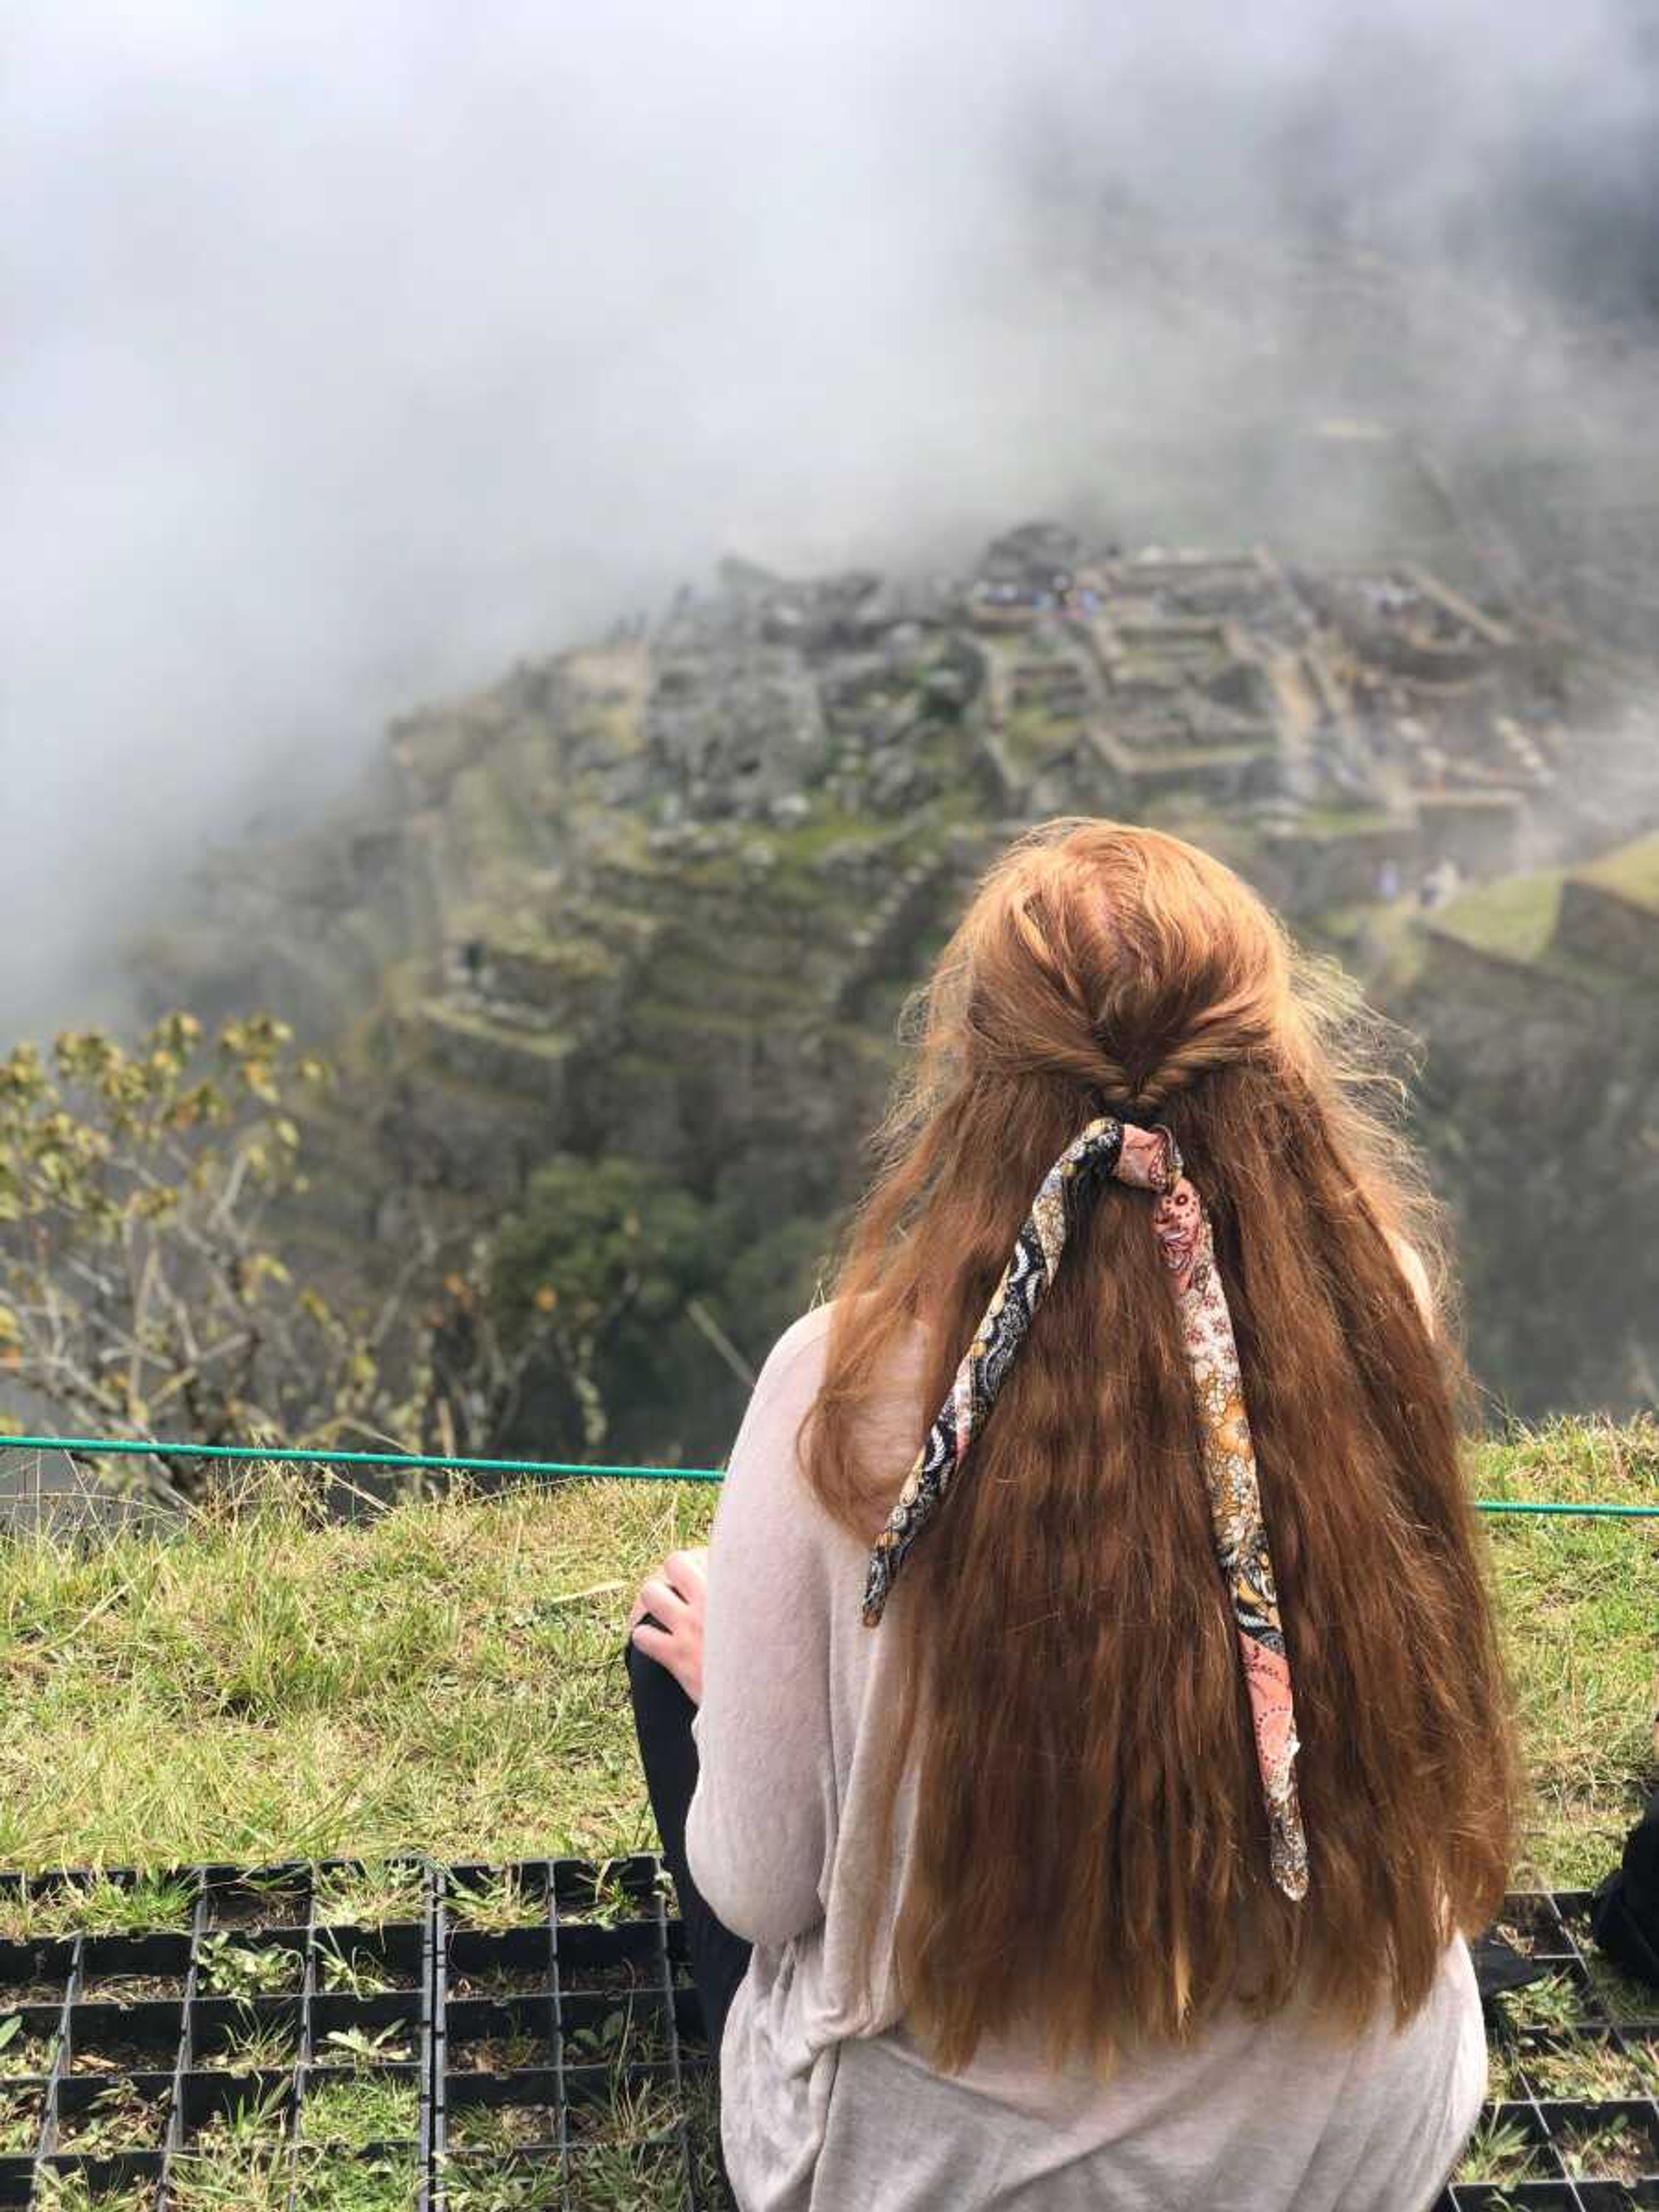 Bailey Bliss had the opportunity to visit Peru while teaching abroad. 